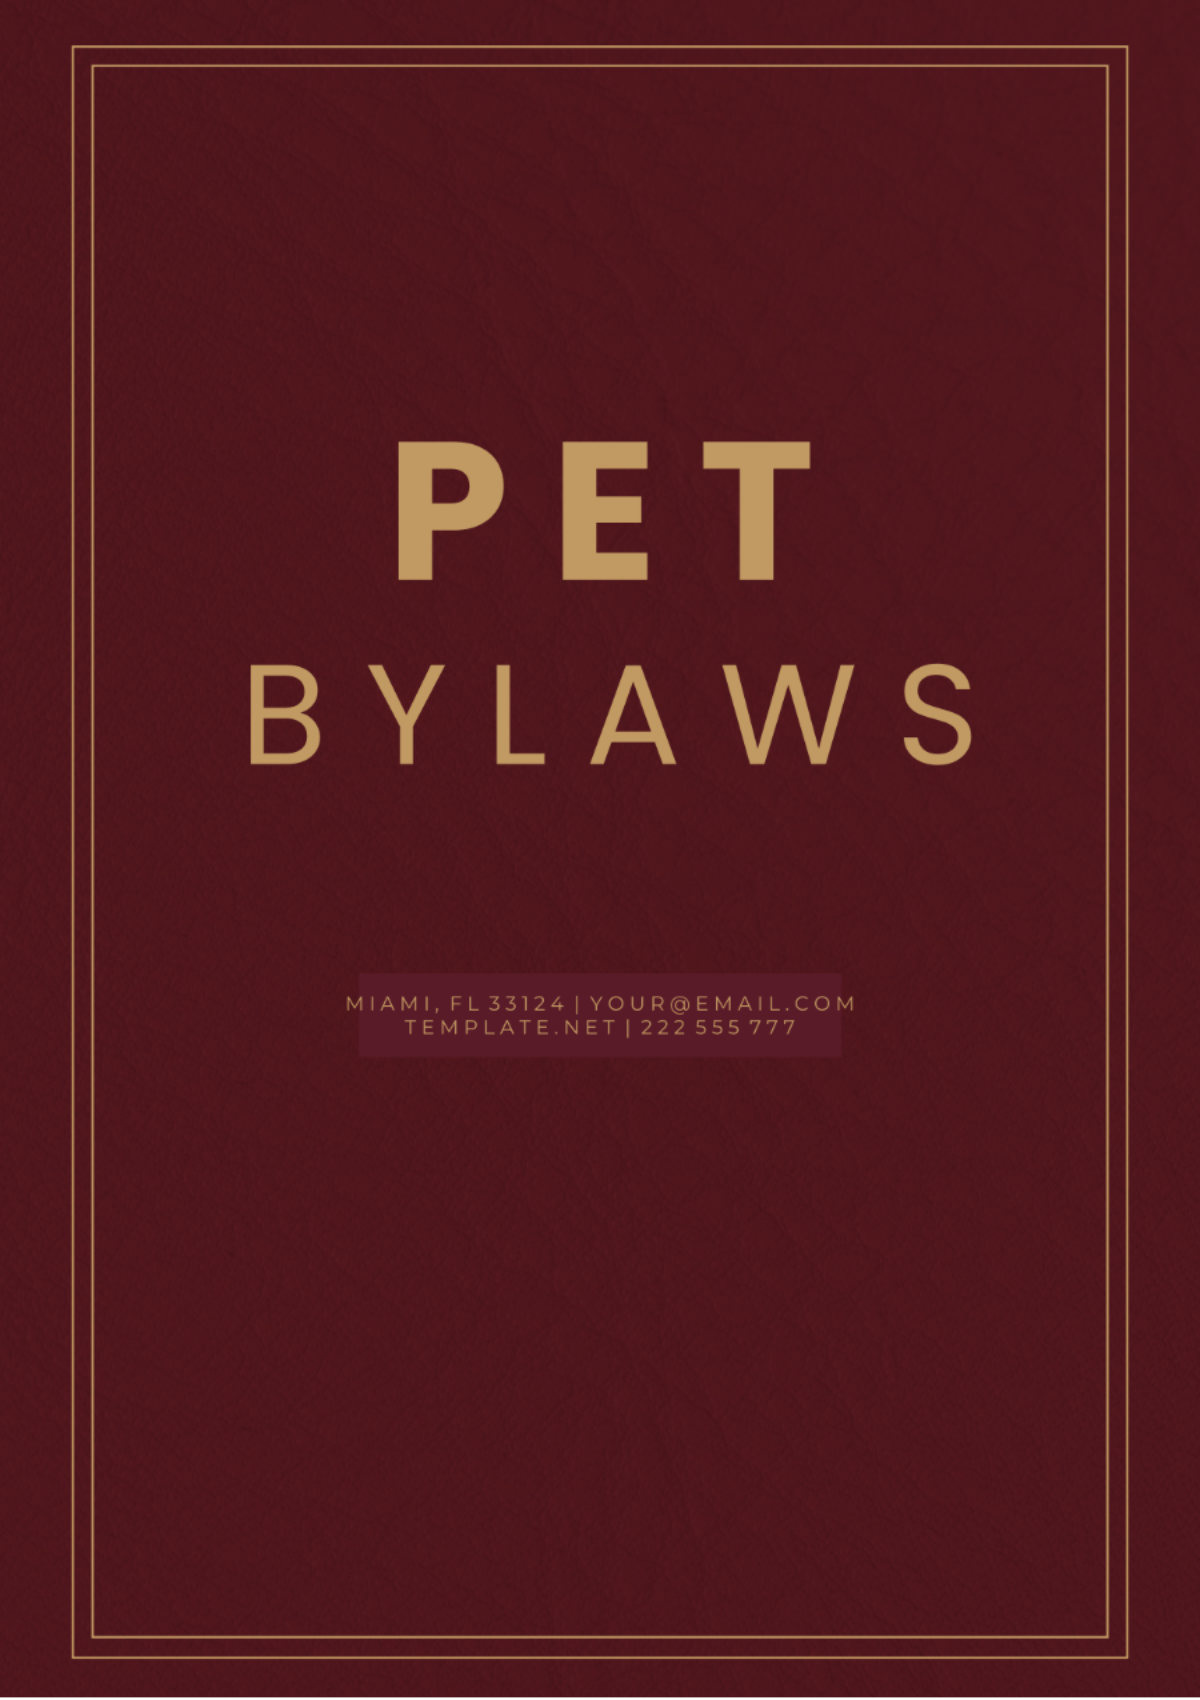 Pet Bylaws Template